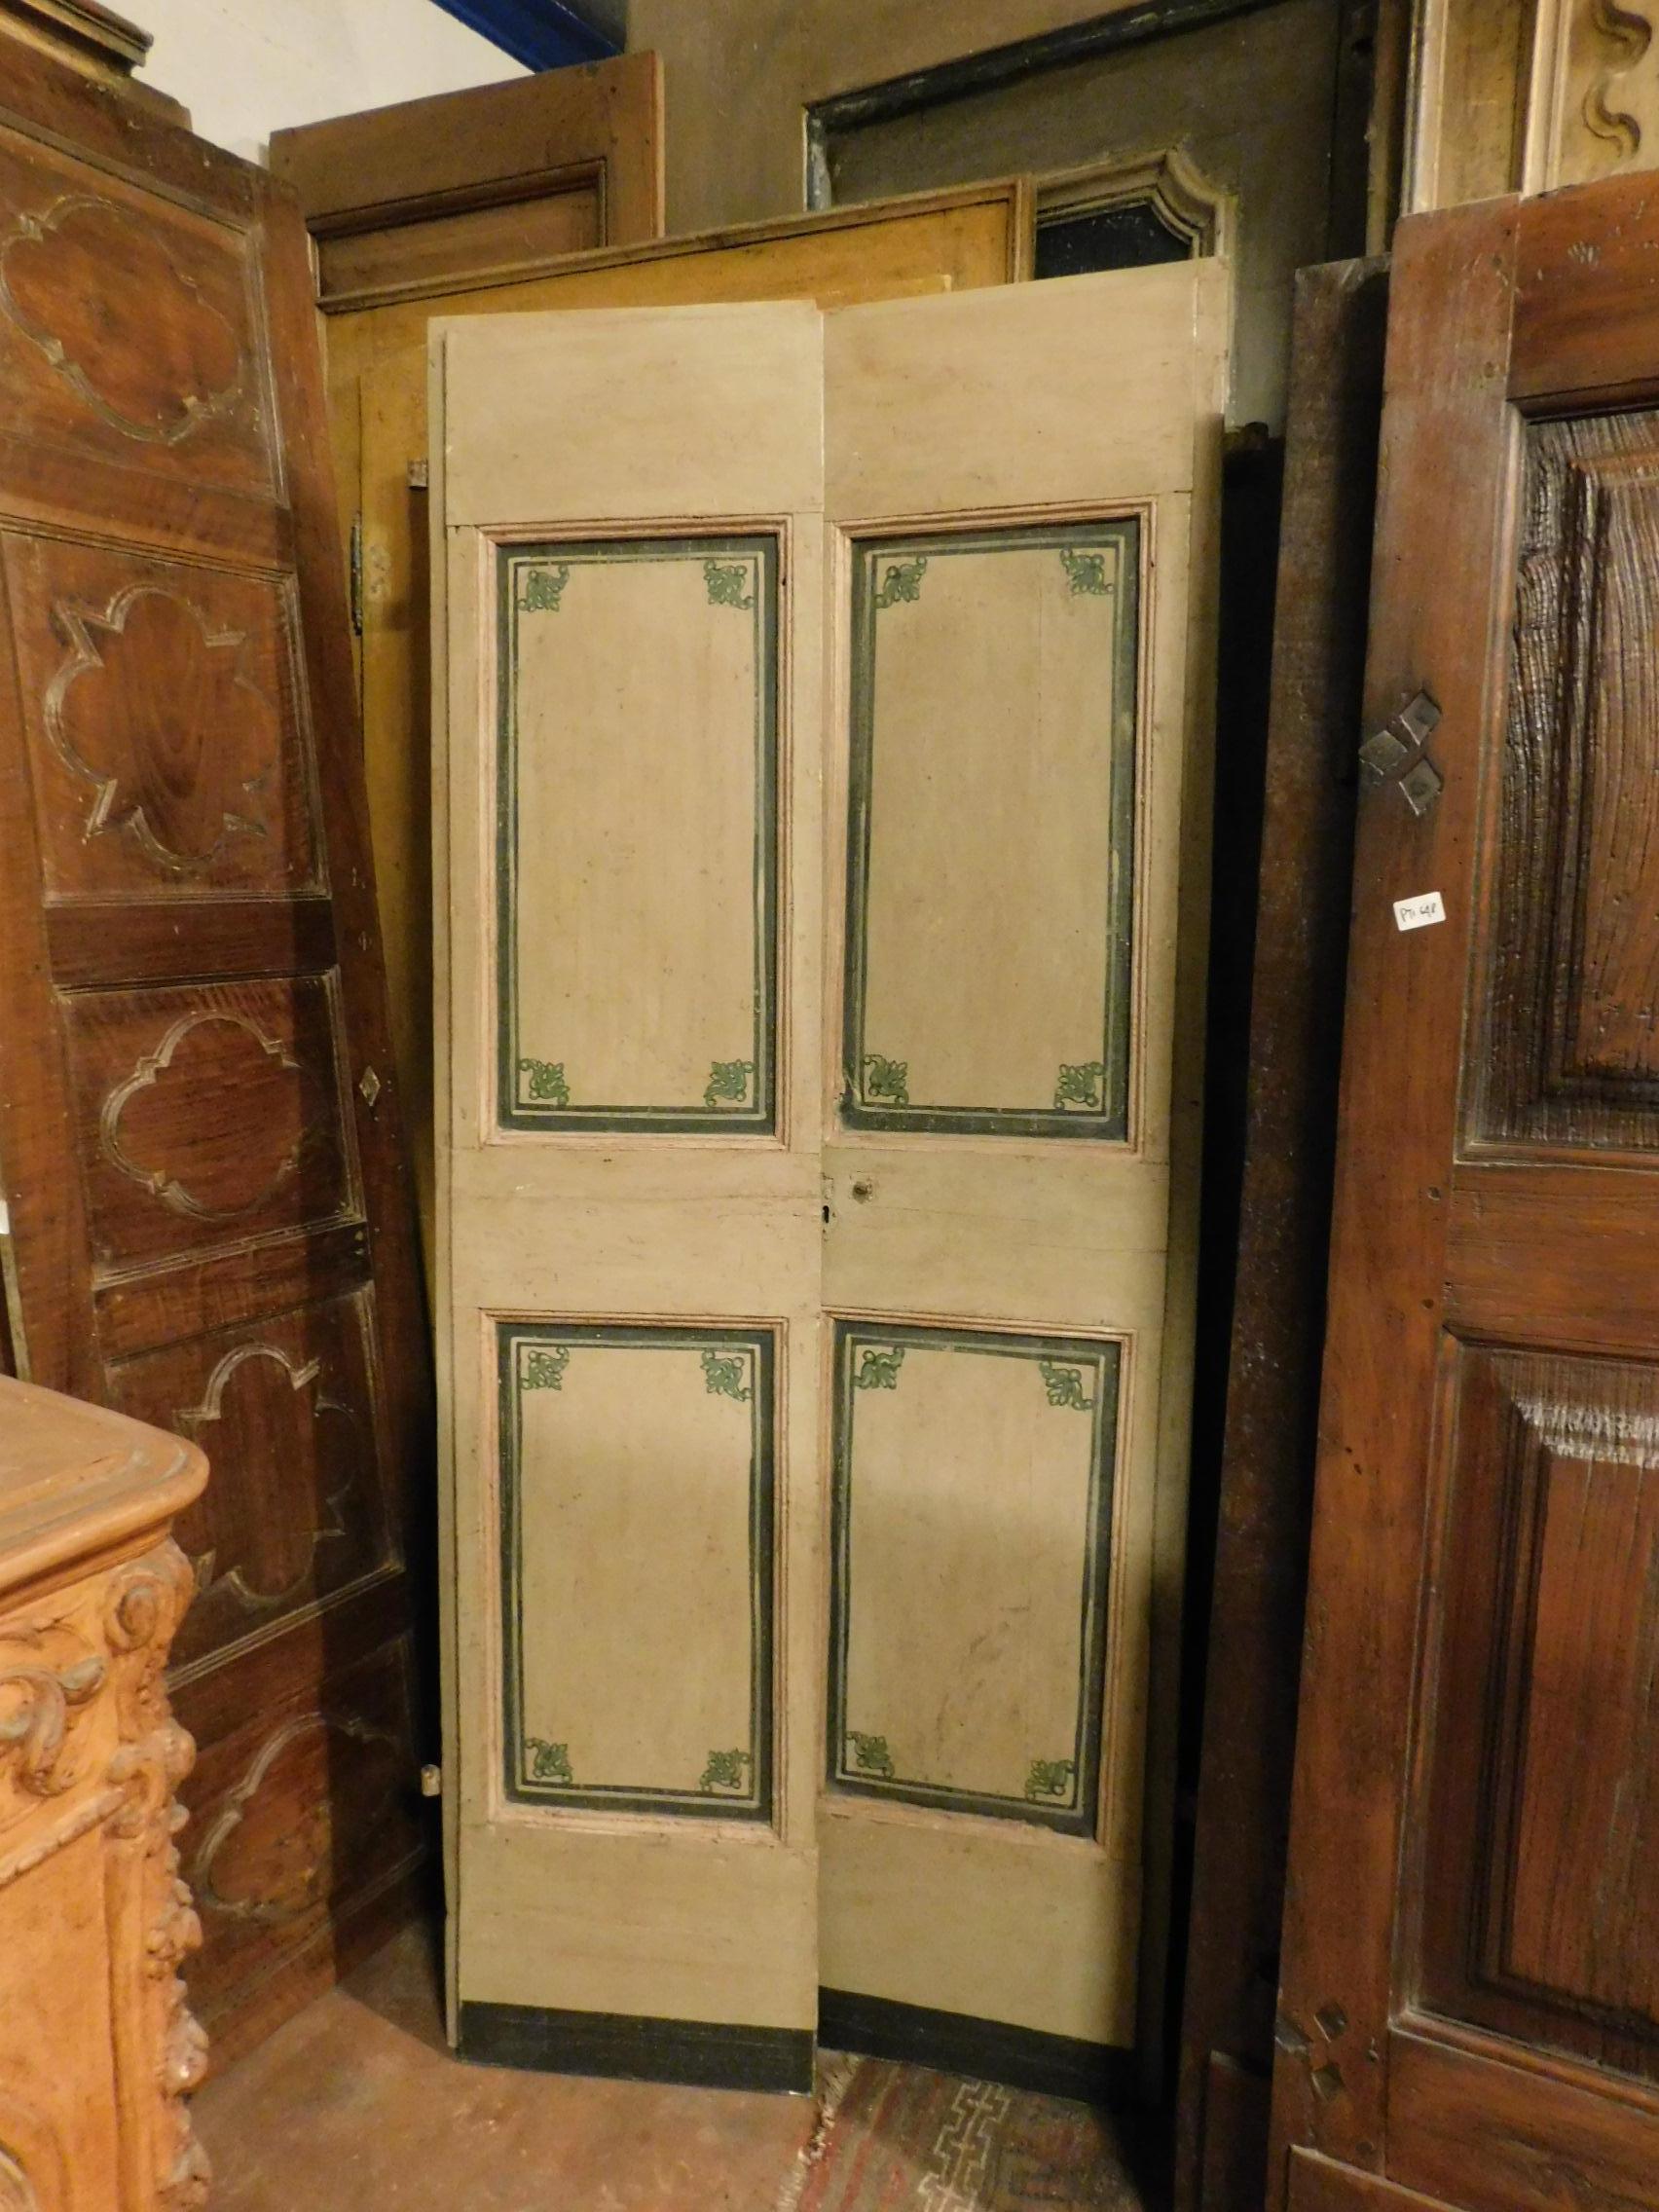 19th century antique lacquered double door, beige with green decorations, original irons, hinges and restoration already done, retro painted with simple frame, effective, can also be used as cupboards or furniture doors.